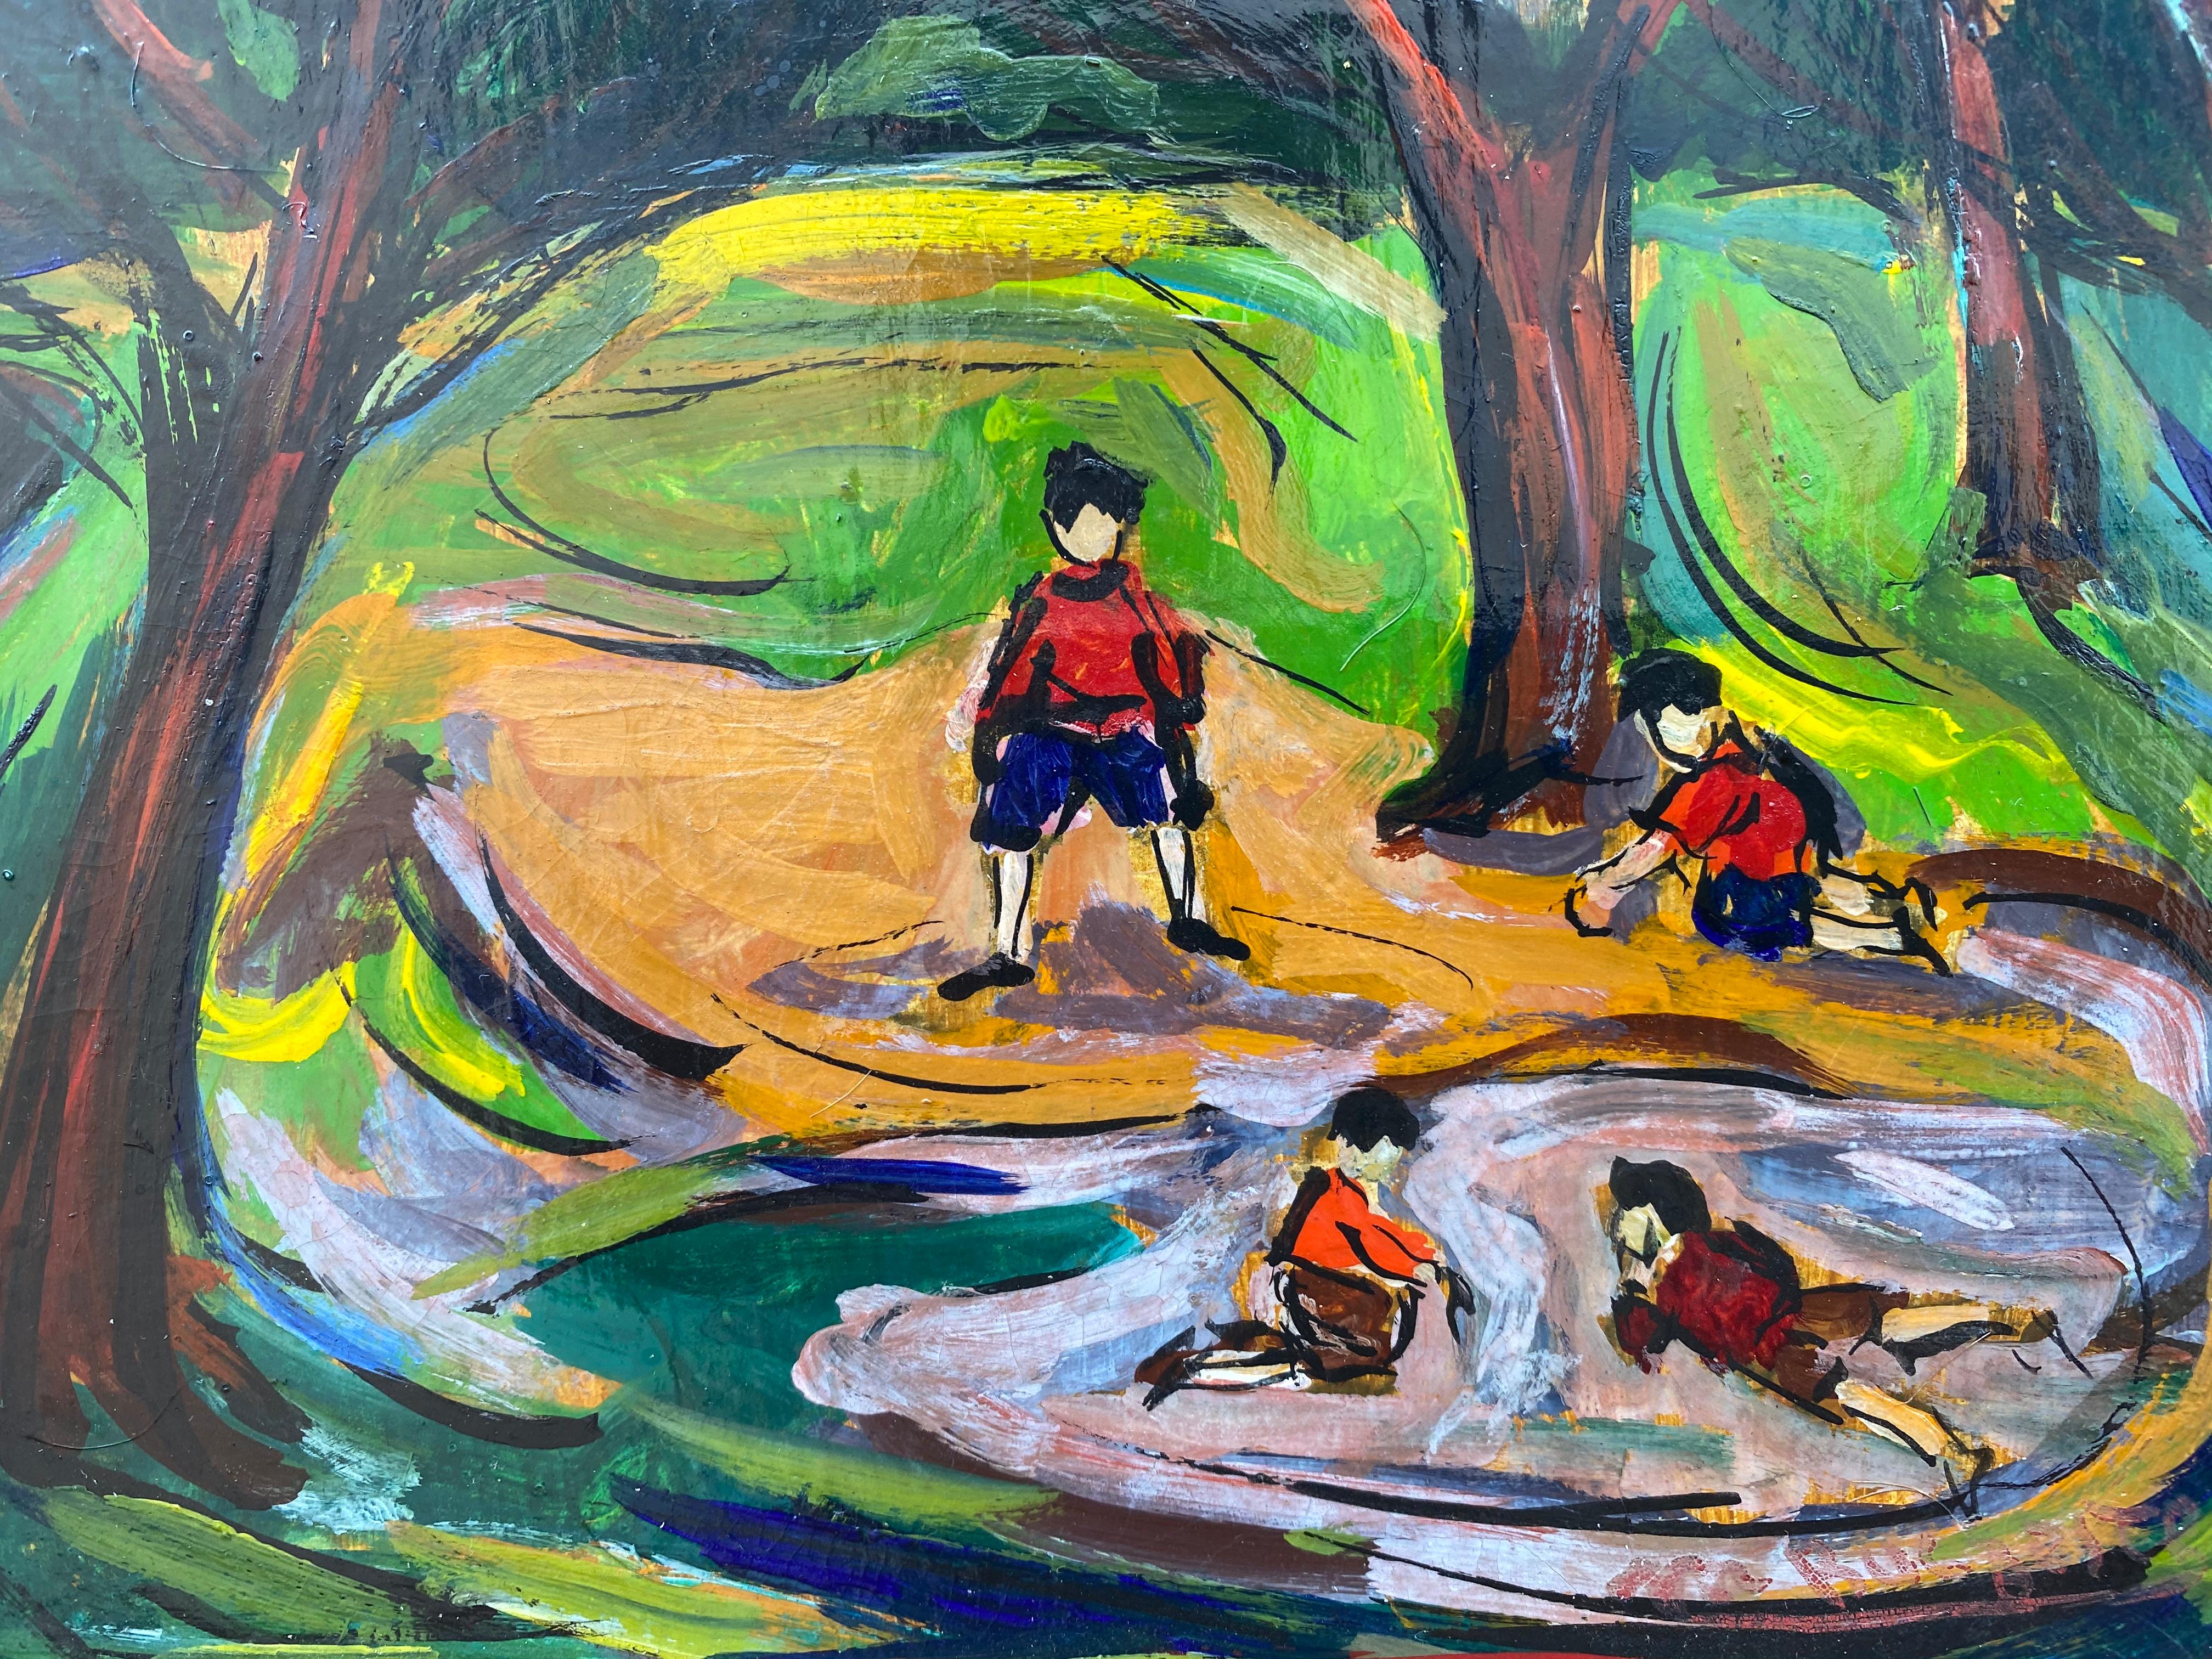 “Boys in the Park” - Post-Modern Painting by Maxim Bugzester